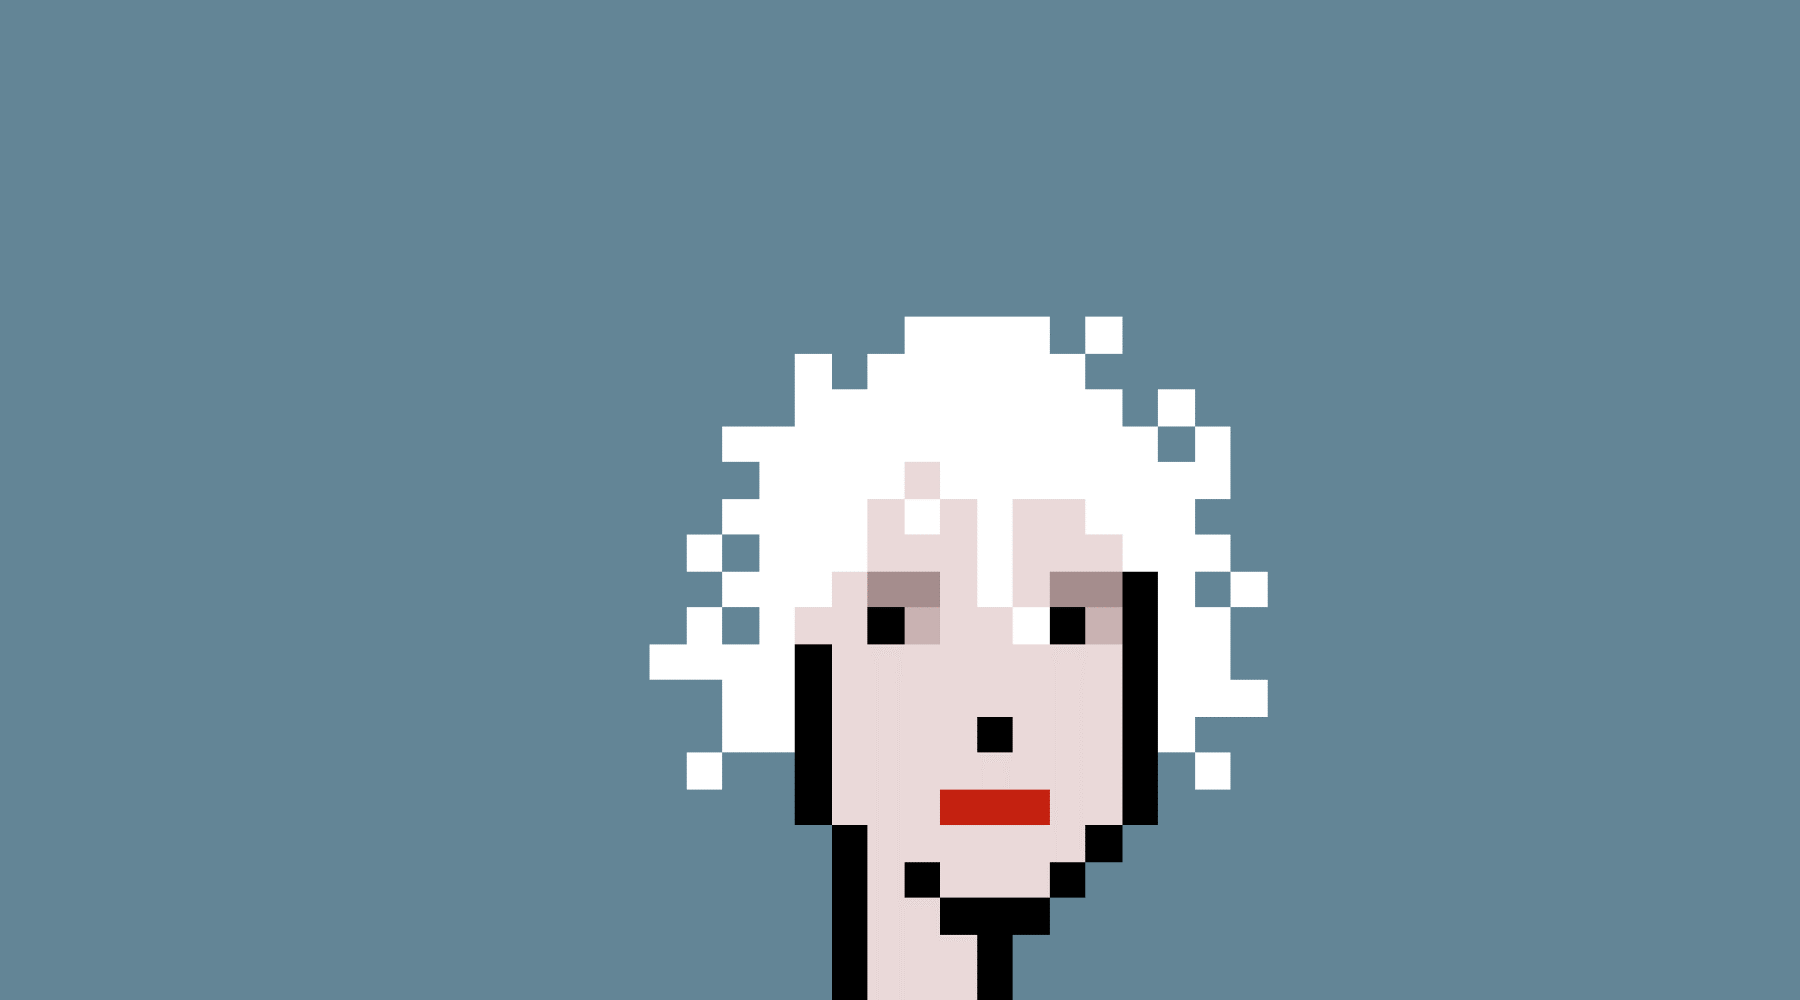 Larva Labs "CryptoPunk #9998" — a pixelated white-haired person